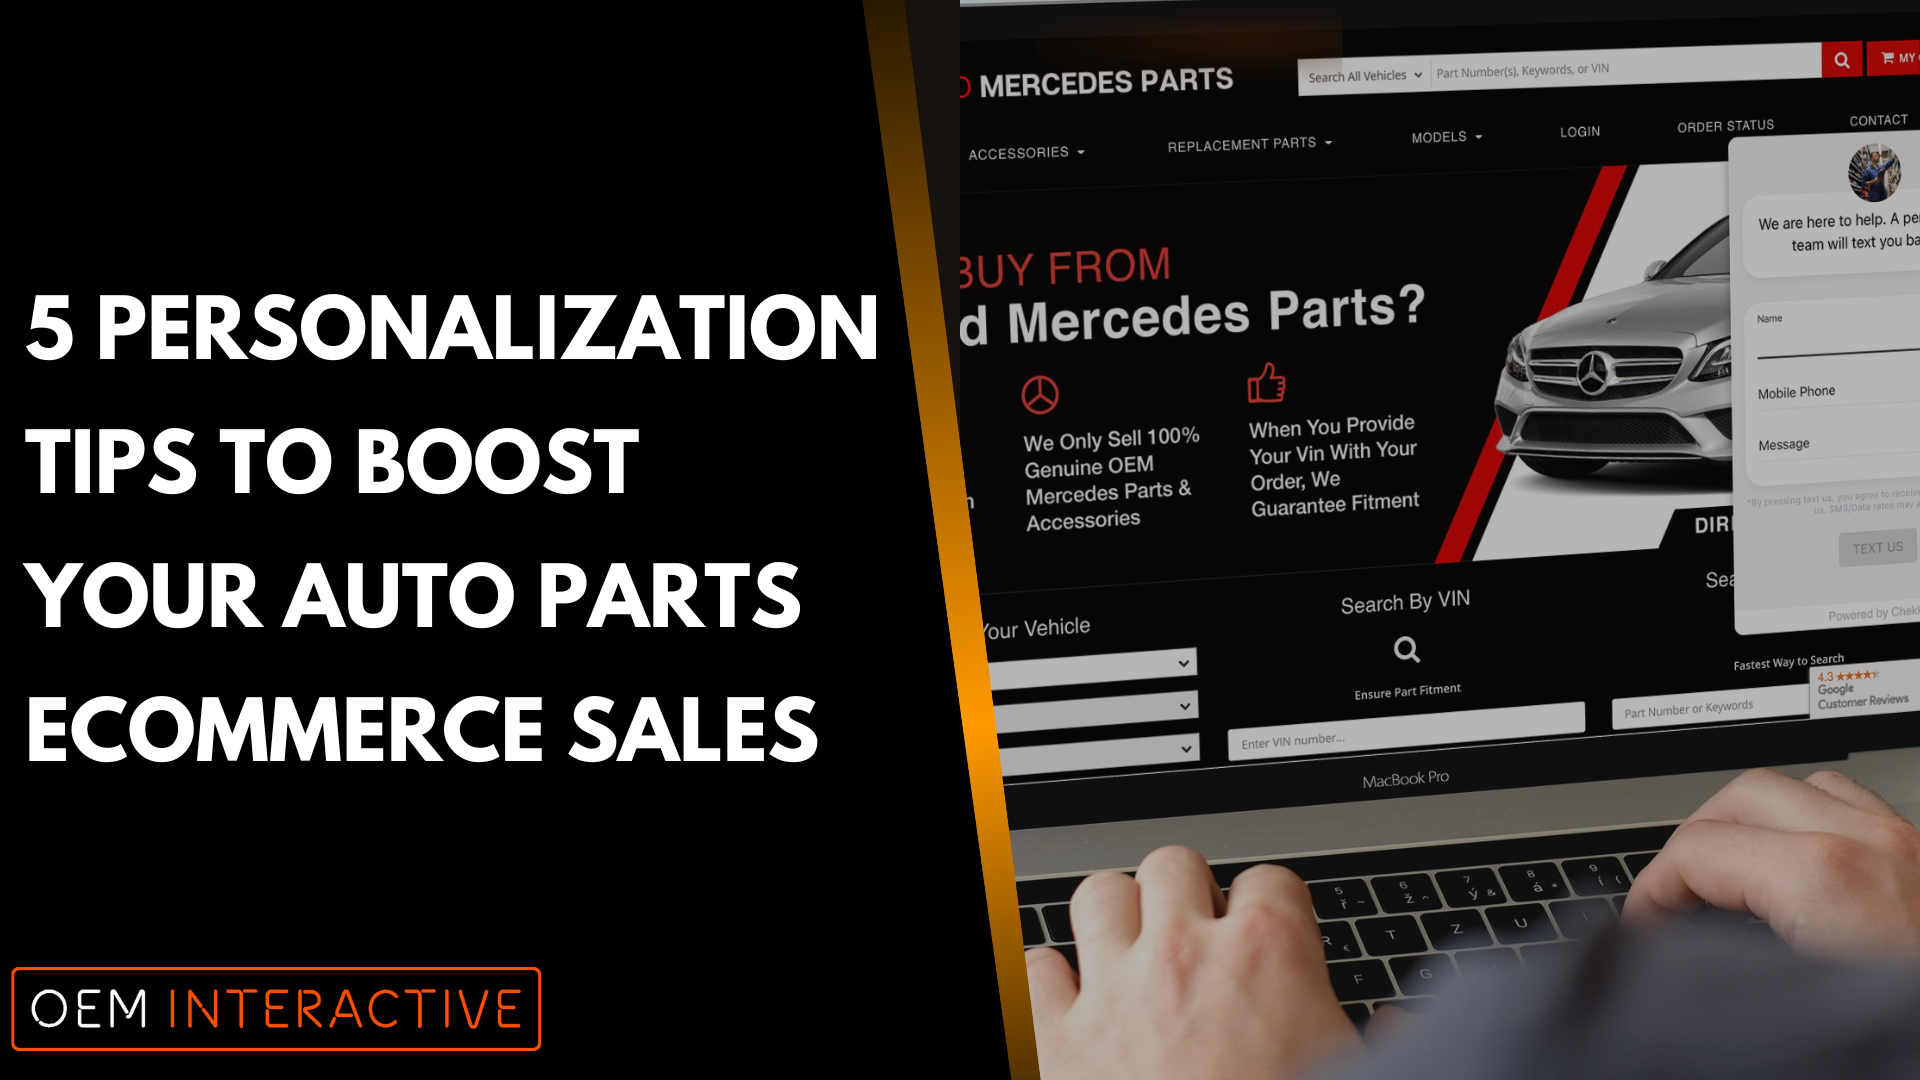 5 Personalization Tips to Boost Auto Parts Ecommerce Sales-Featured Image